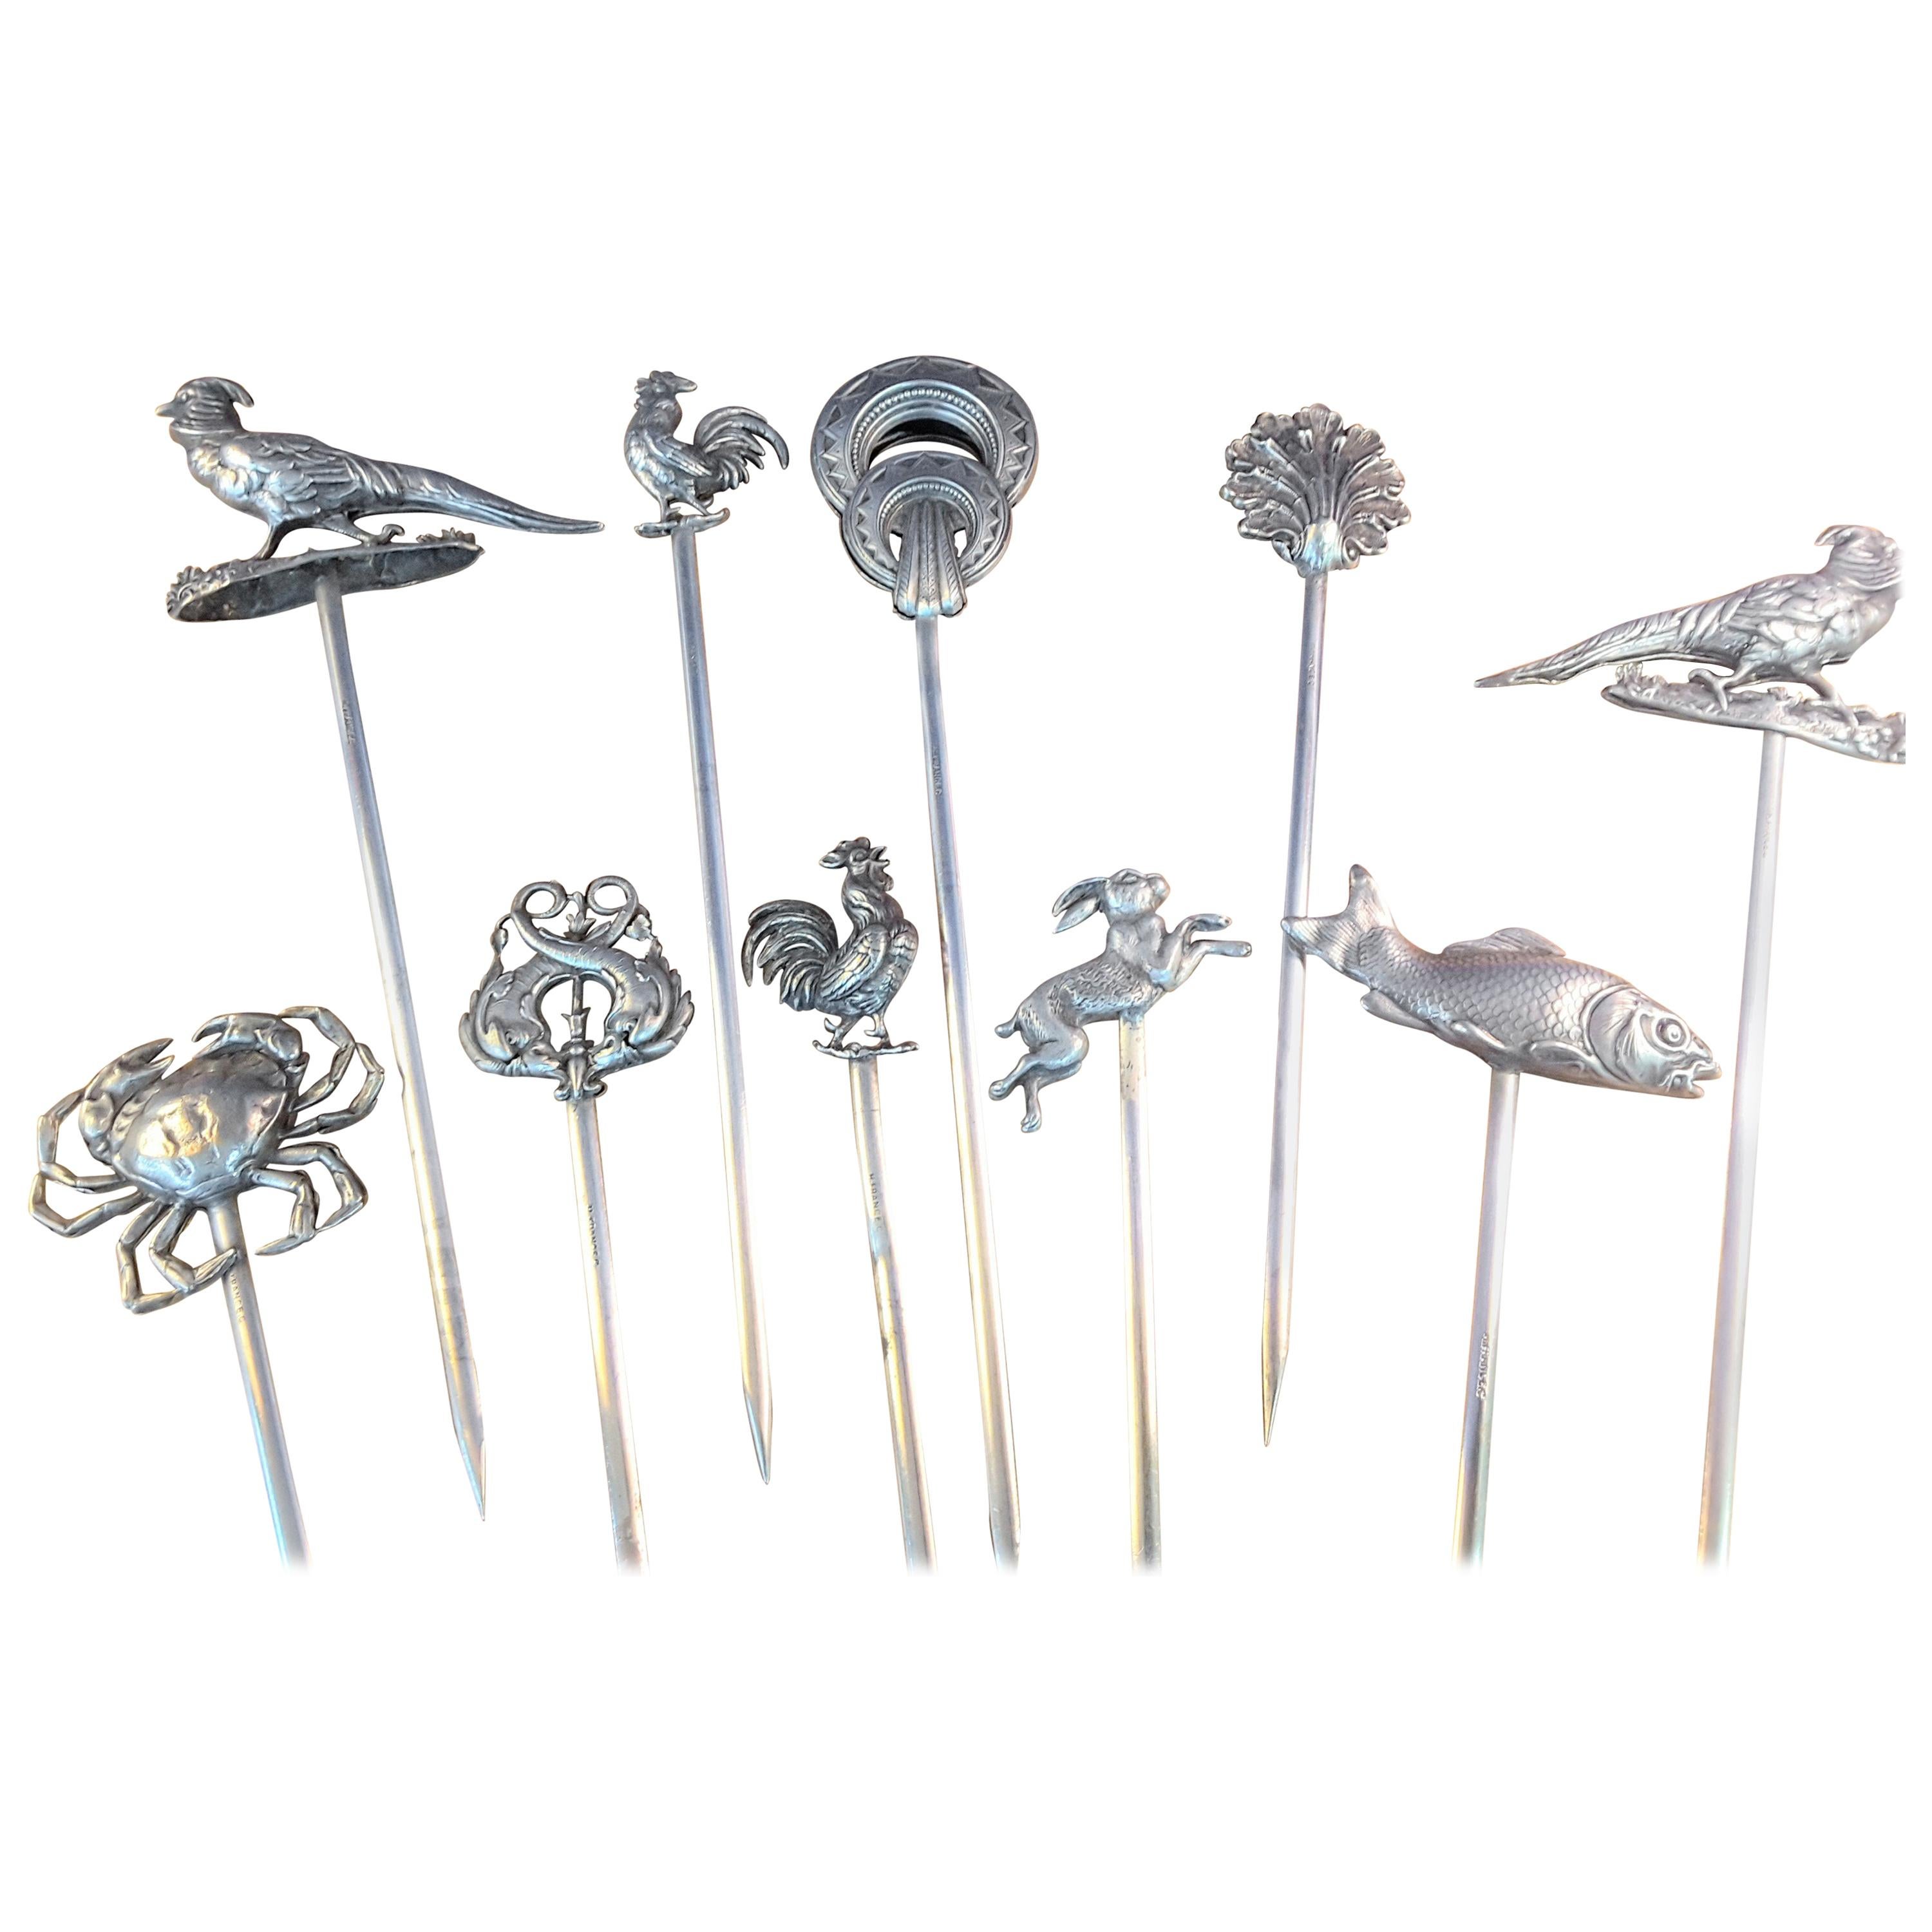 Set of 10 HC France Figural and Animal Meat Skewers